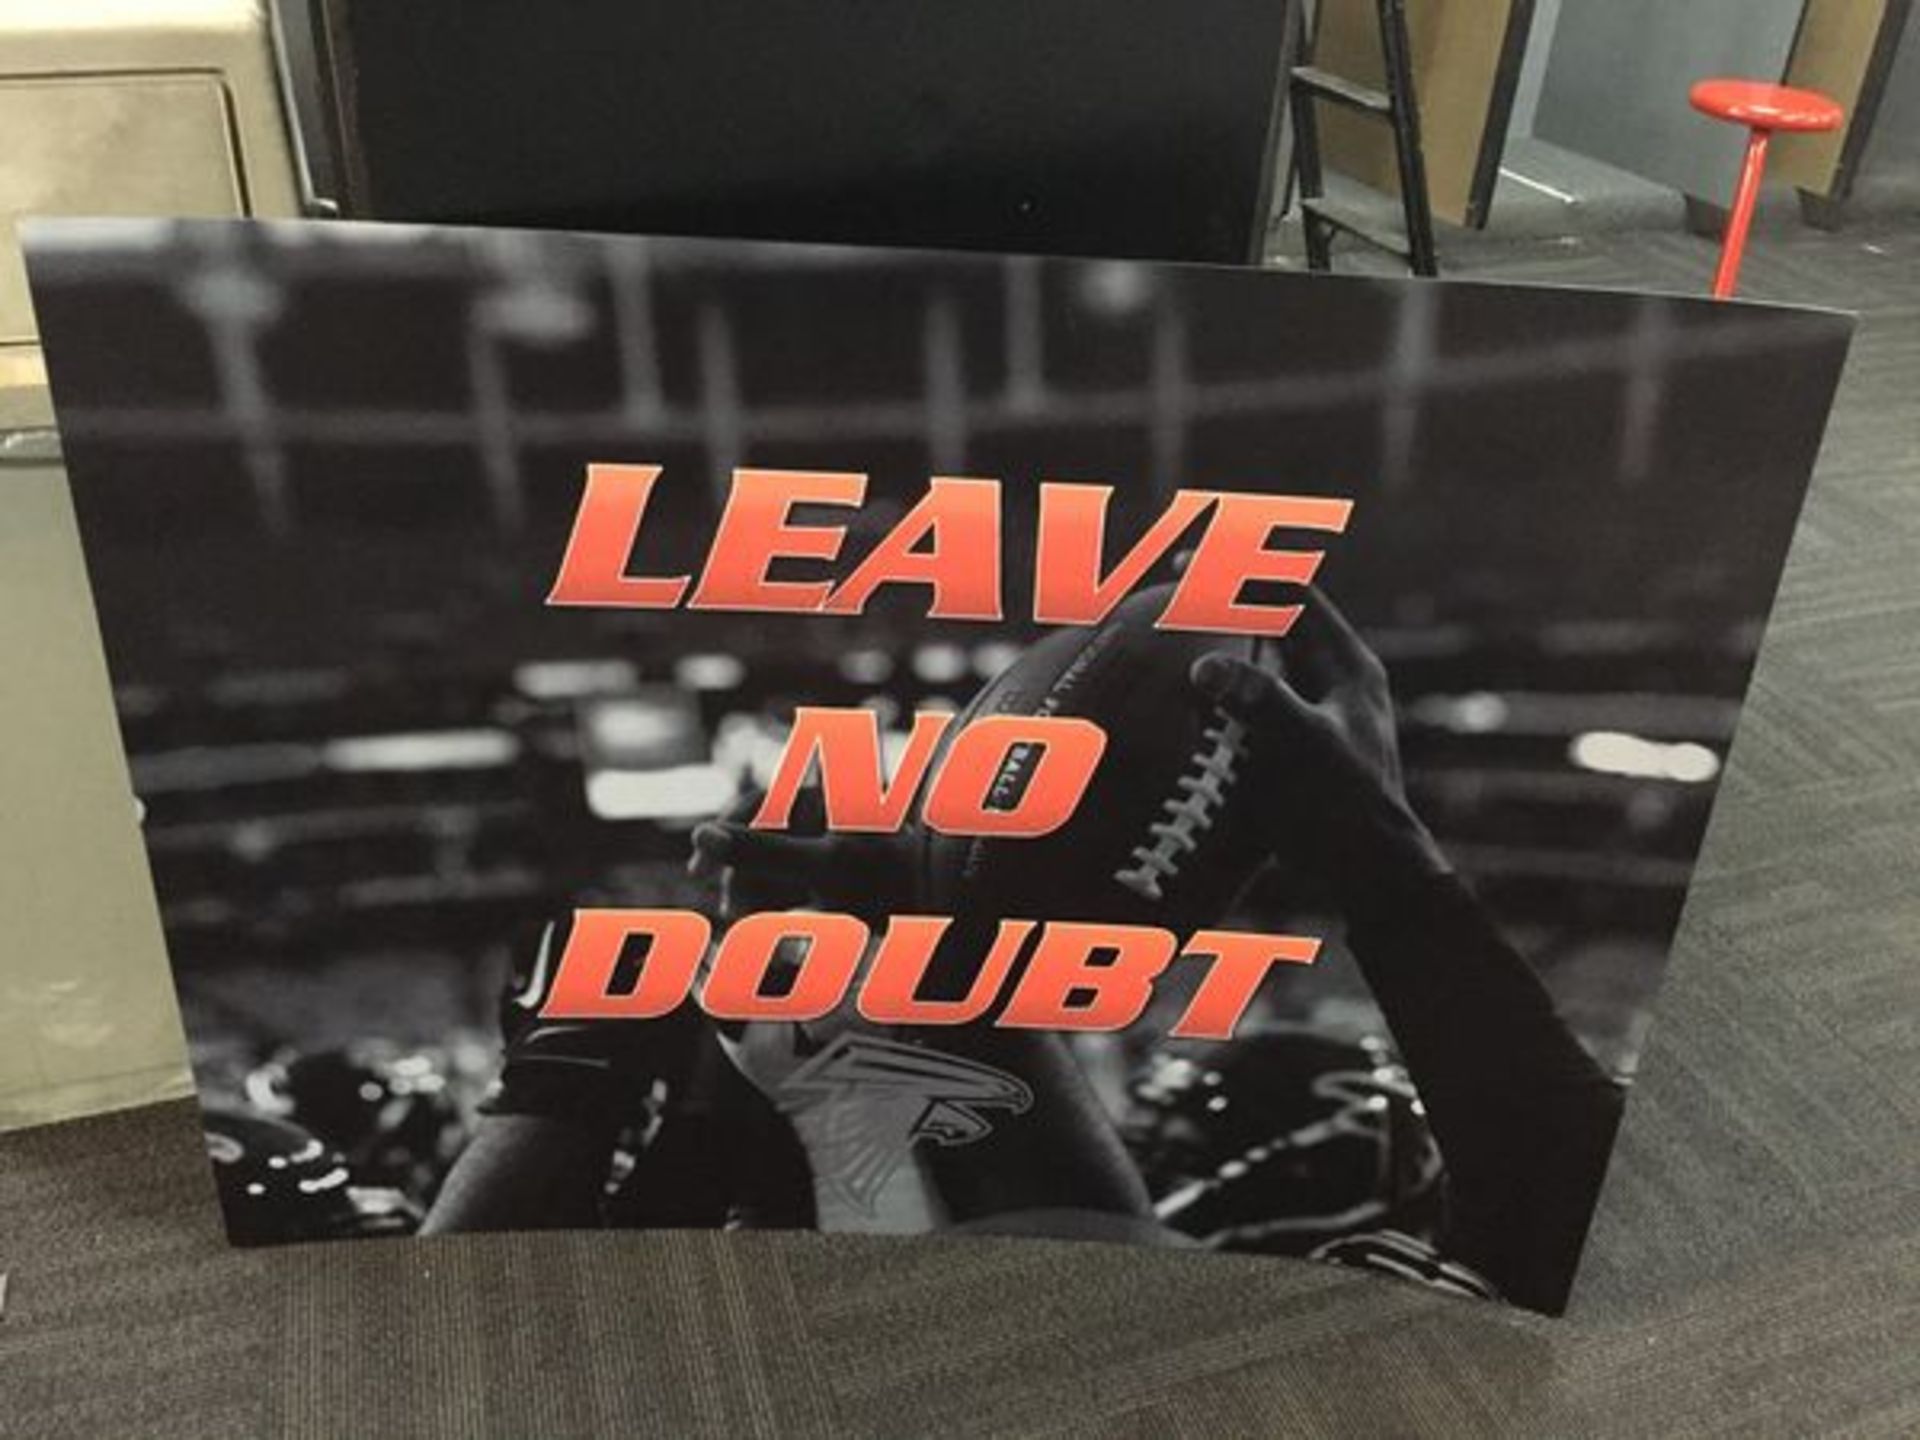 Leave No Doubt Poster / From Falcons Locker Room / This item includes Georgia Dome Authentication